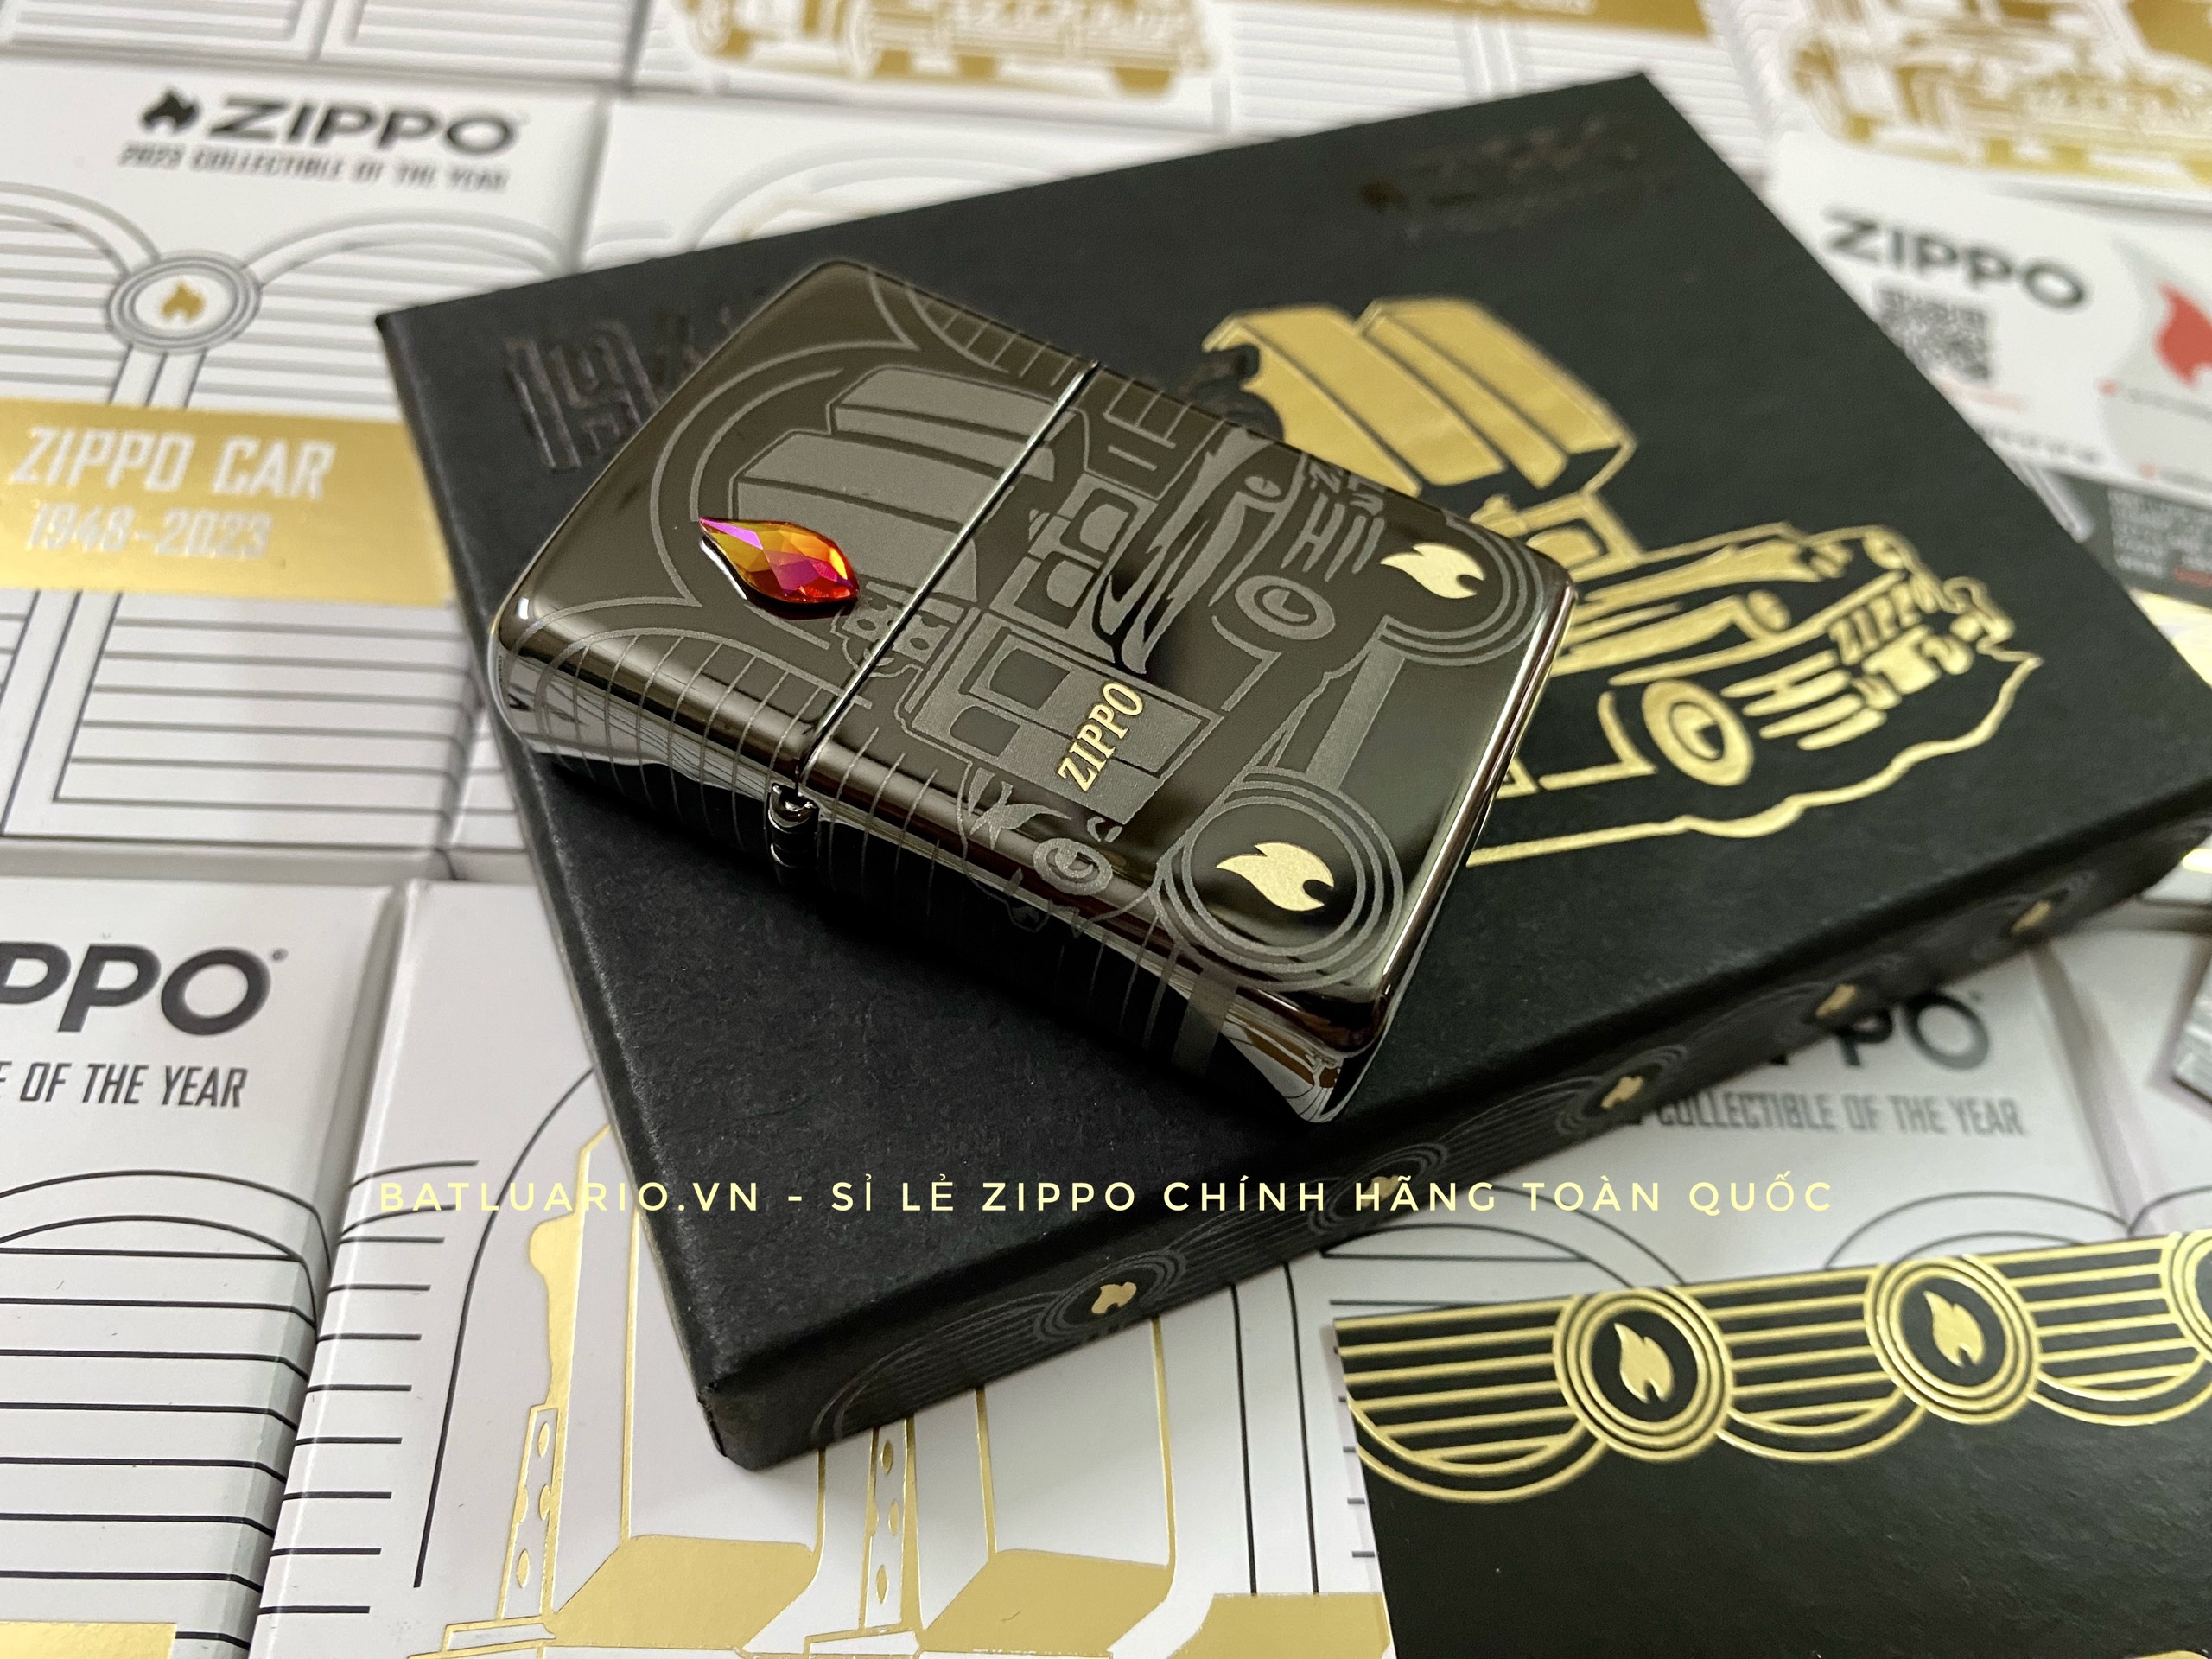 Zippo 48692 - Zippo 2023 Collectible Of The Year - Zippo Car 75th Anniversary Asia Pacific Limited Edition - Zippo COTY 2023 - Honoring 75 Years Of The Zippo Car 50